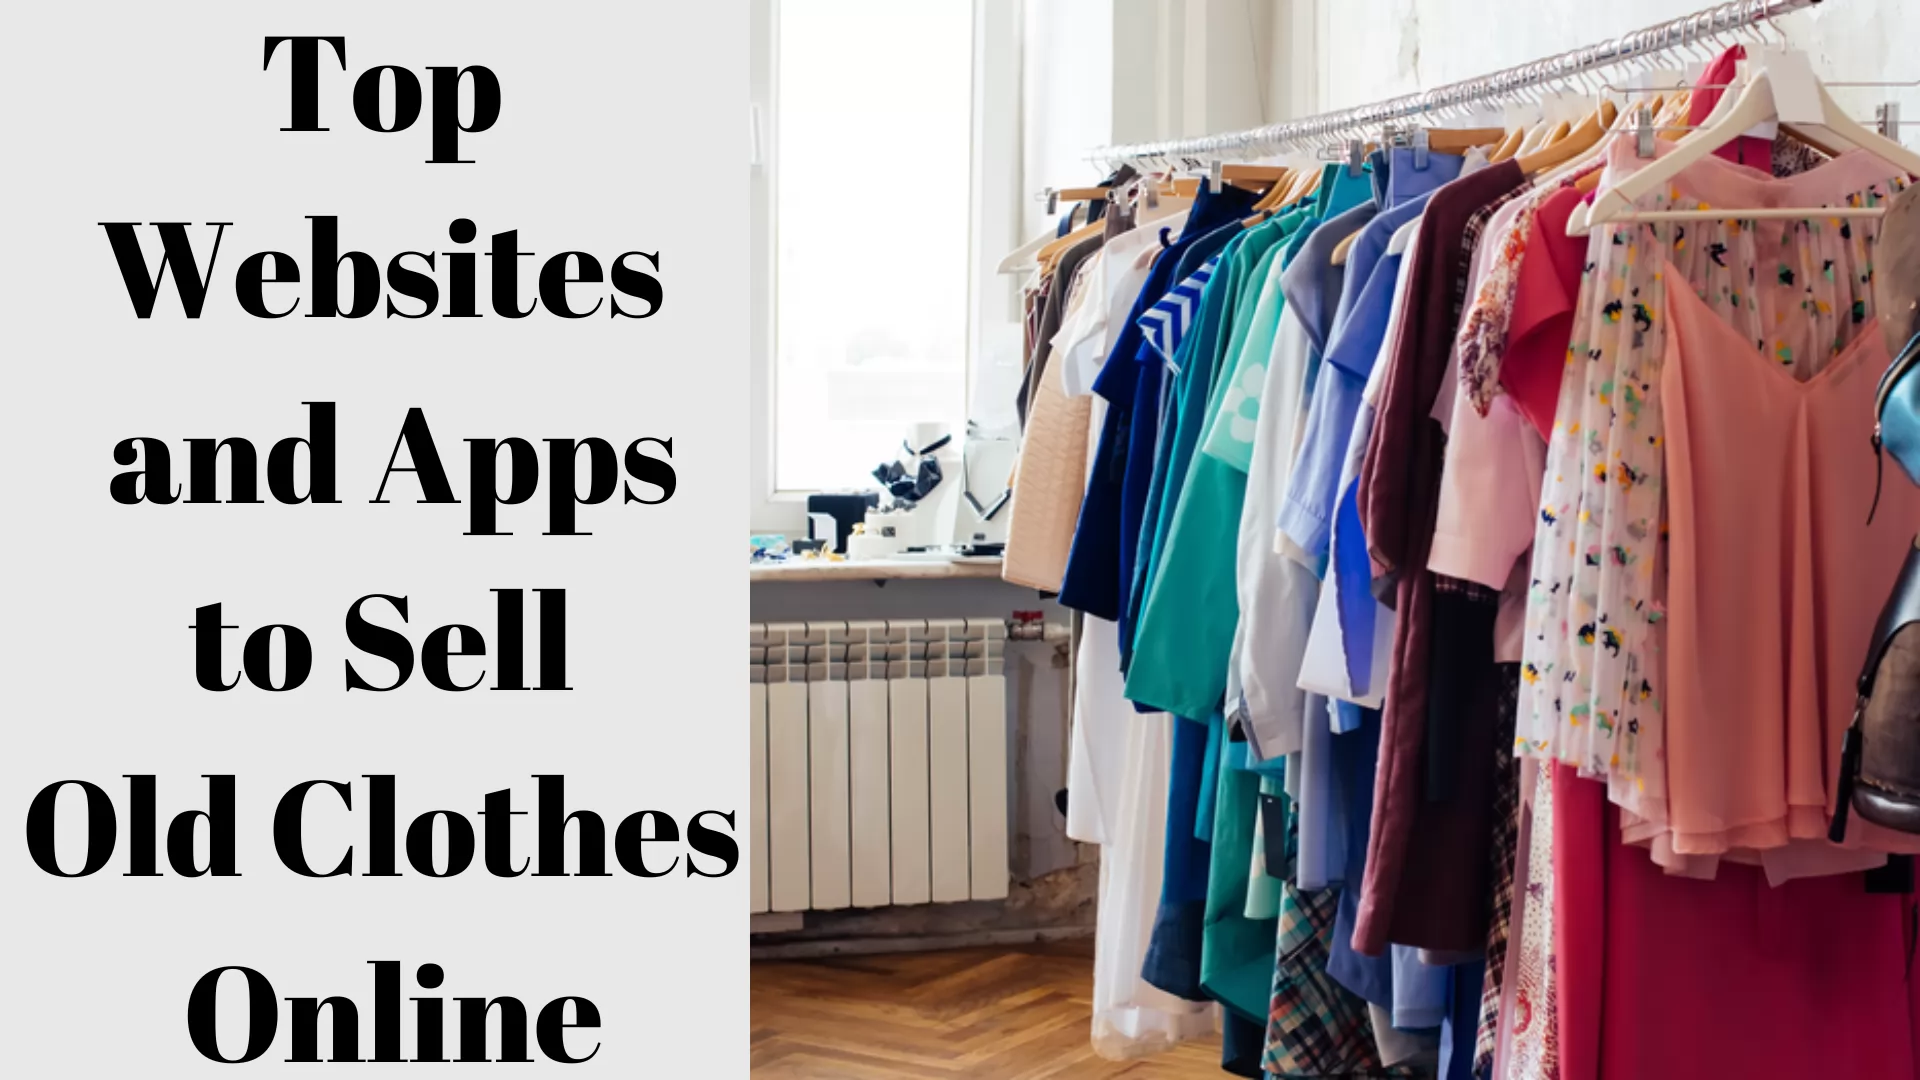 Websites and Apps to Sell Old Clothes Online in India